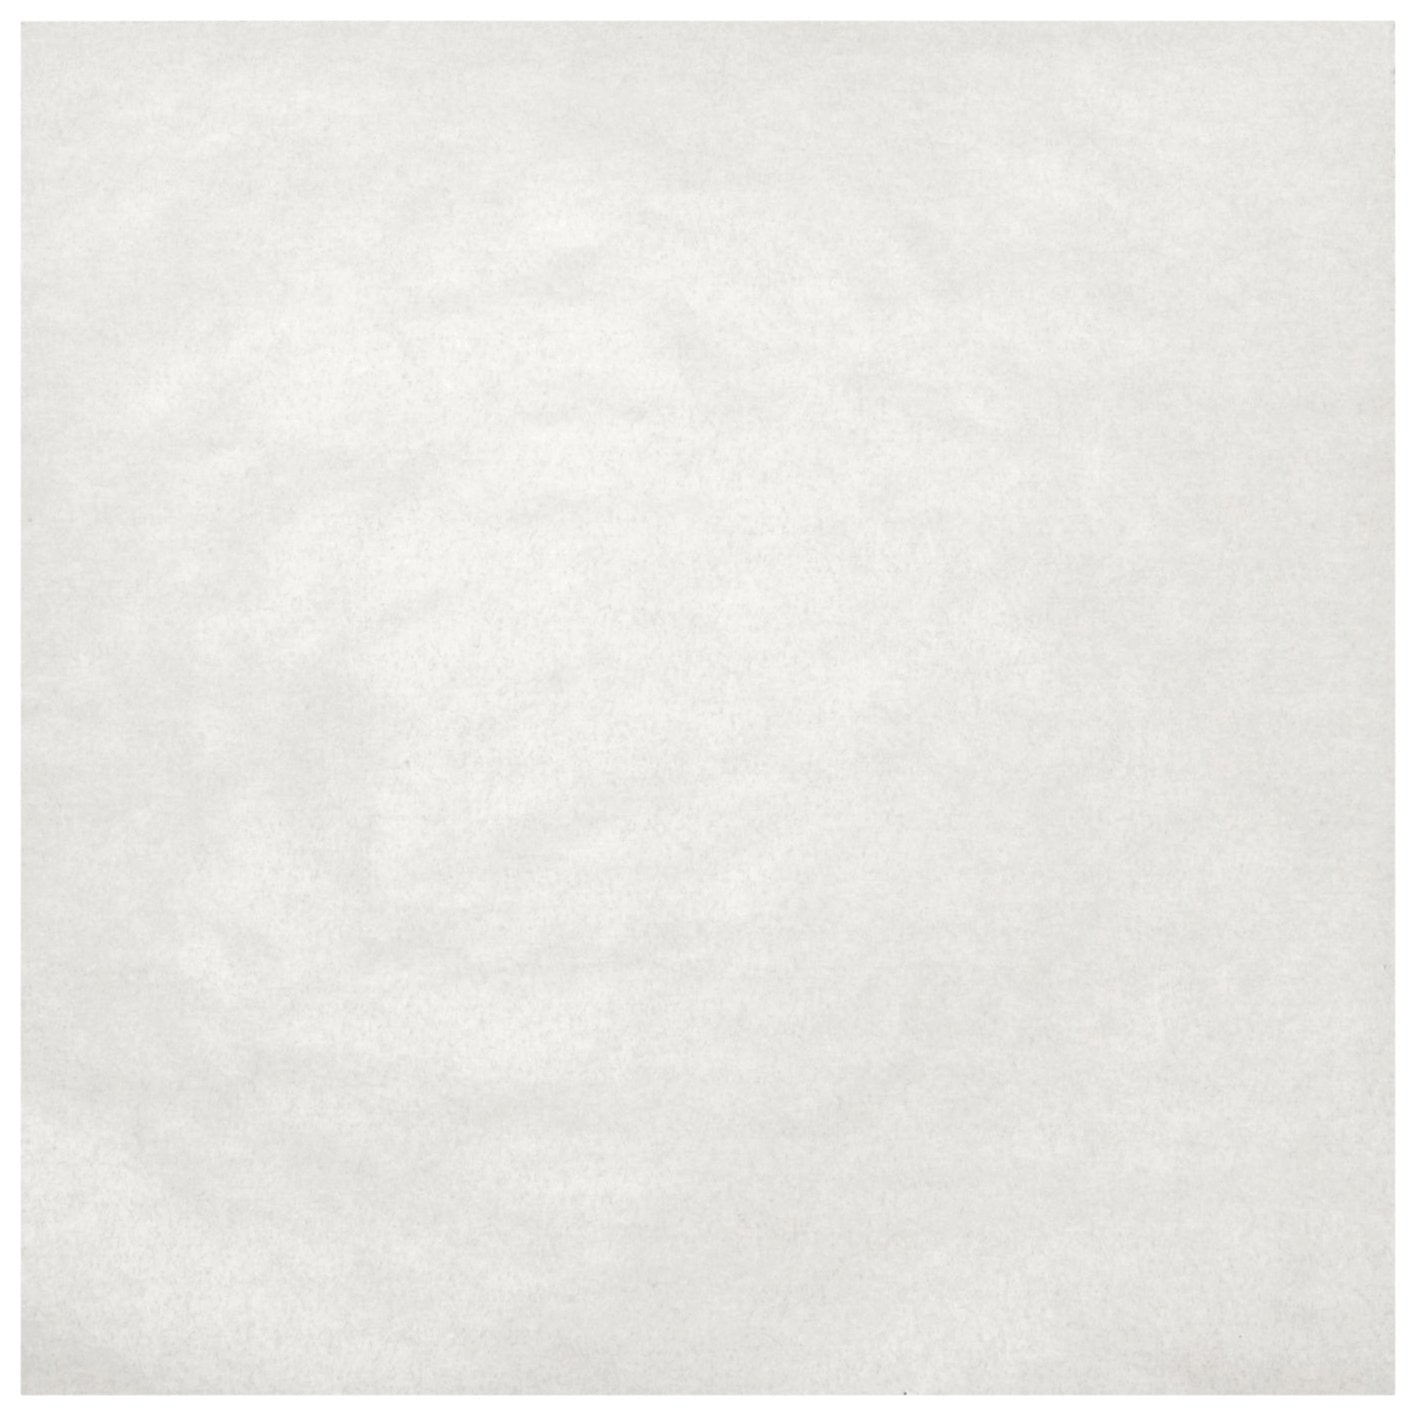 Dyn-A-Med Glass Fiber Sample Pads FOR IR BALANCE AND MICROWAVE MOISTURE TESTS 4" X 4" SQUARE (Case of 10 pks of 400) PN: 80081